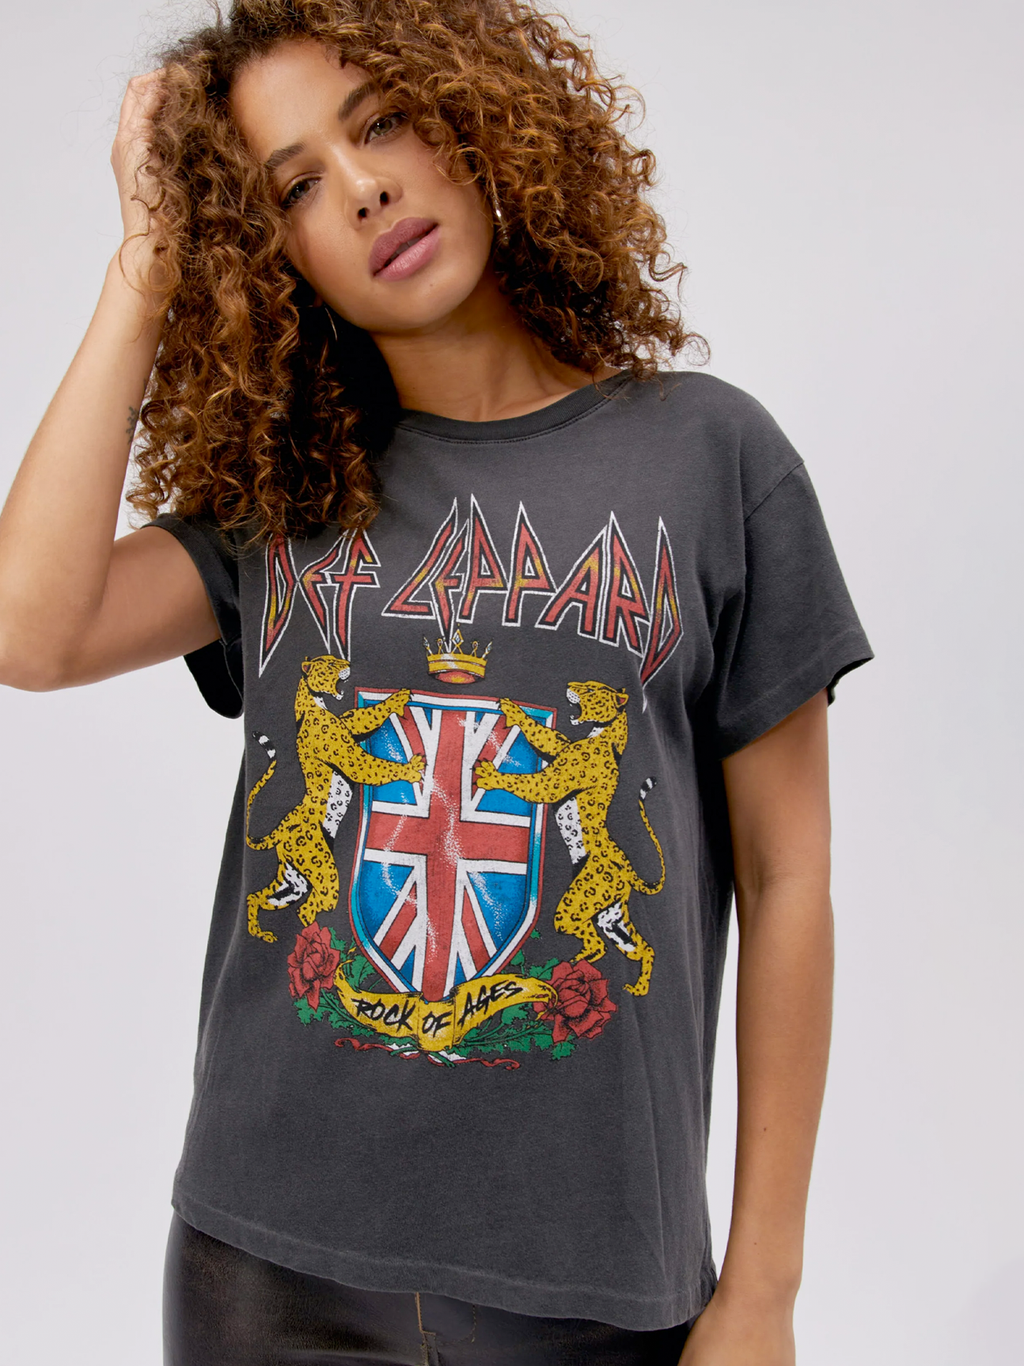 Def Leppard Rock of Ages Tour Tee